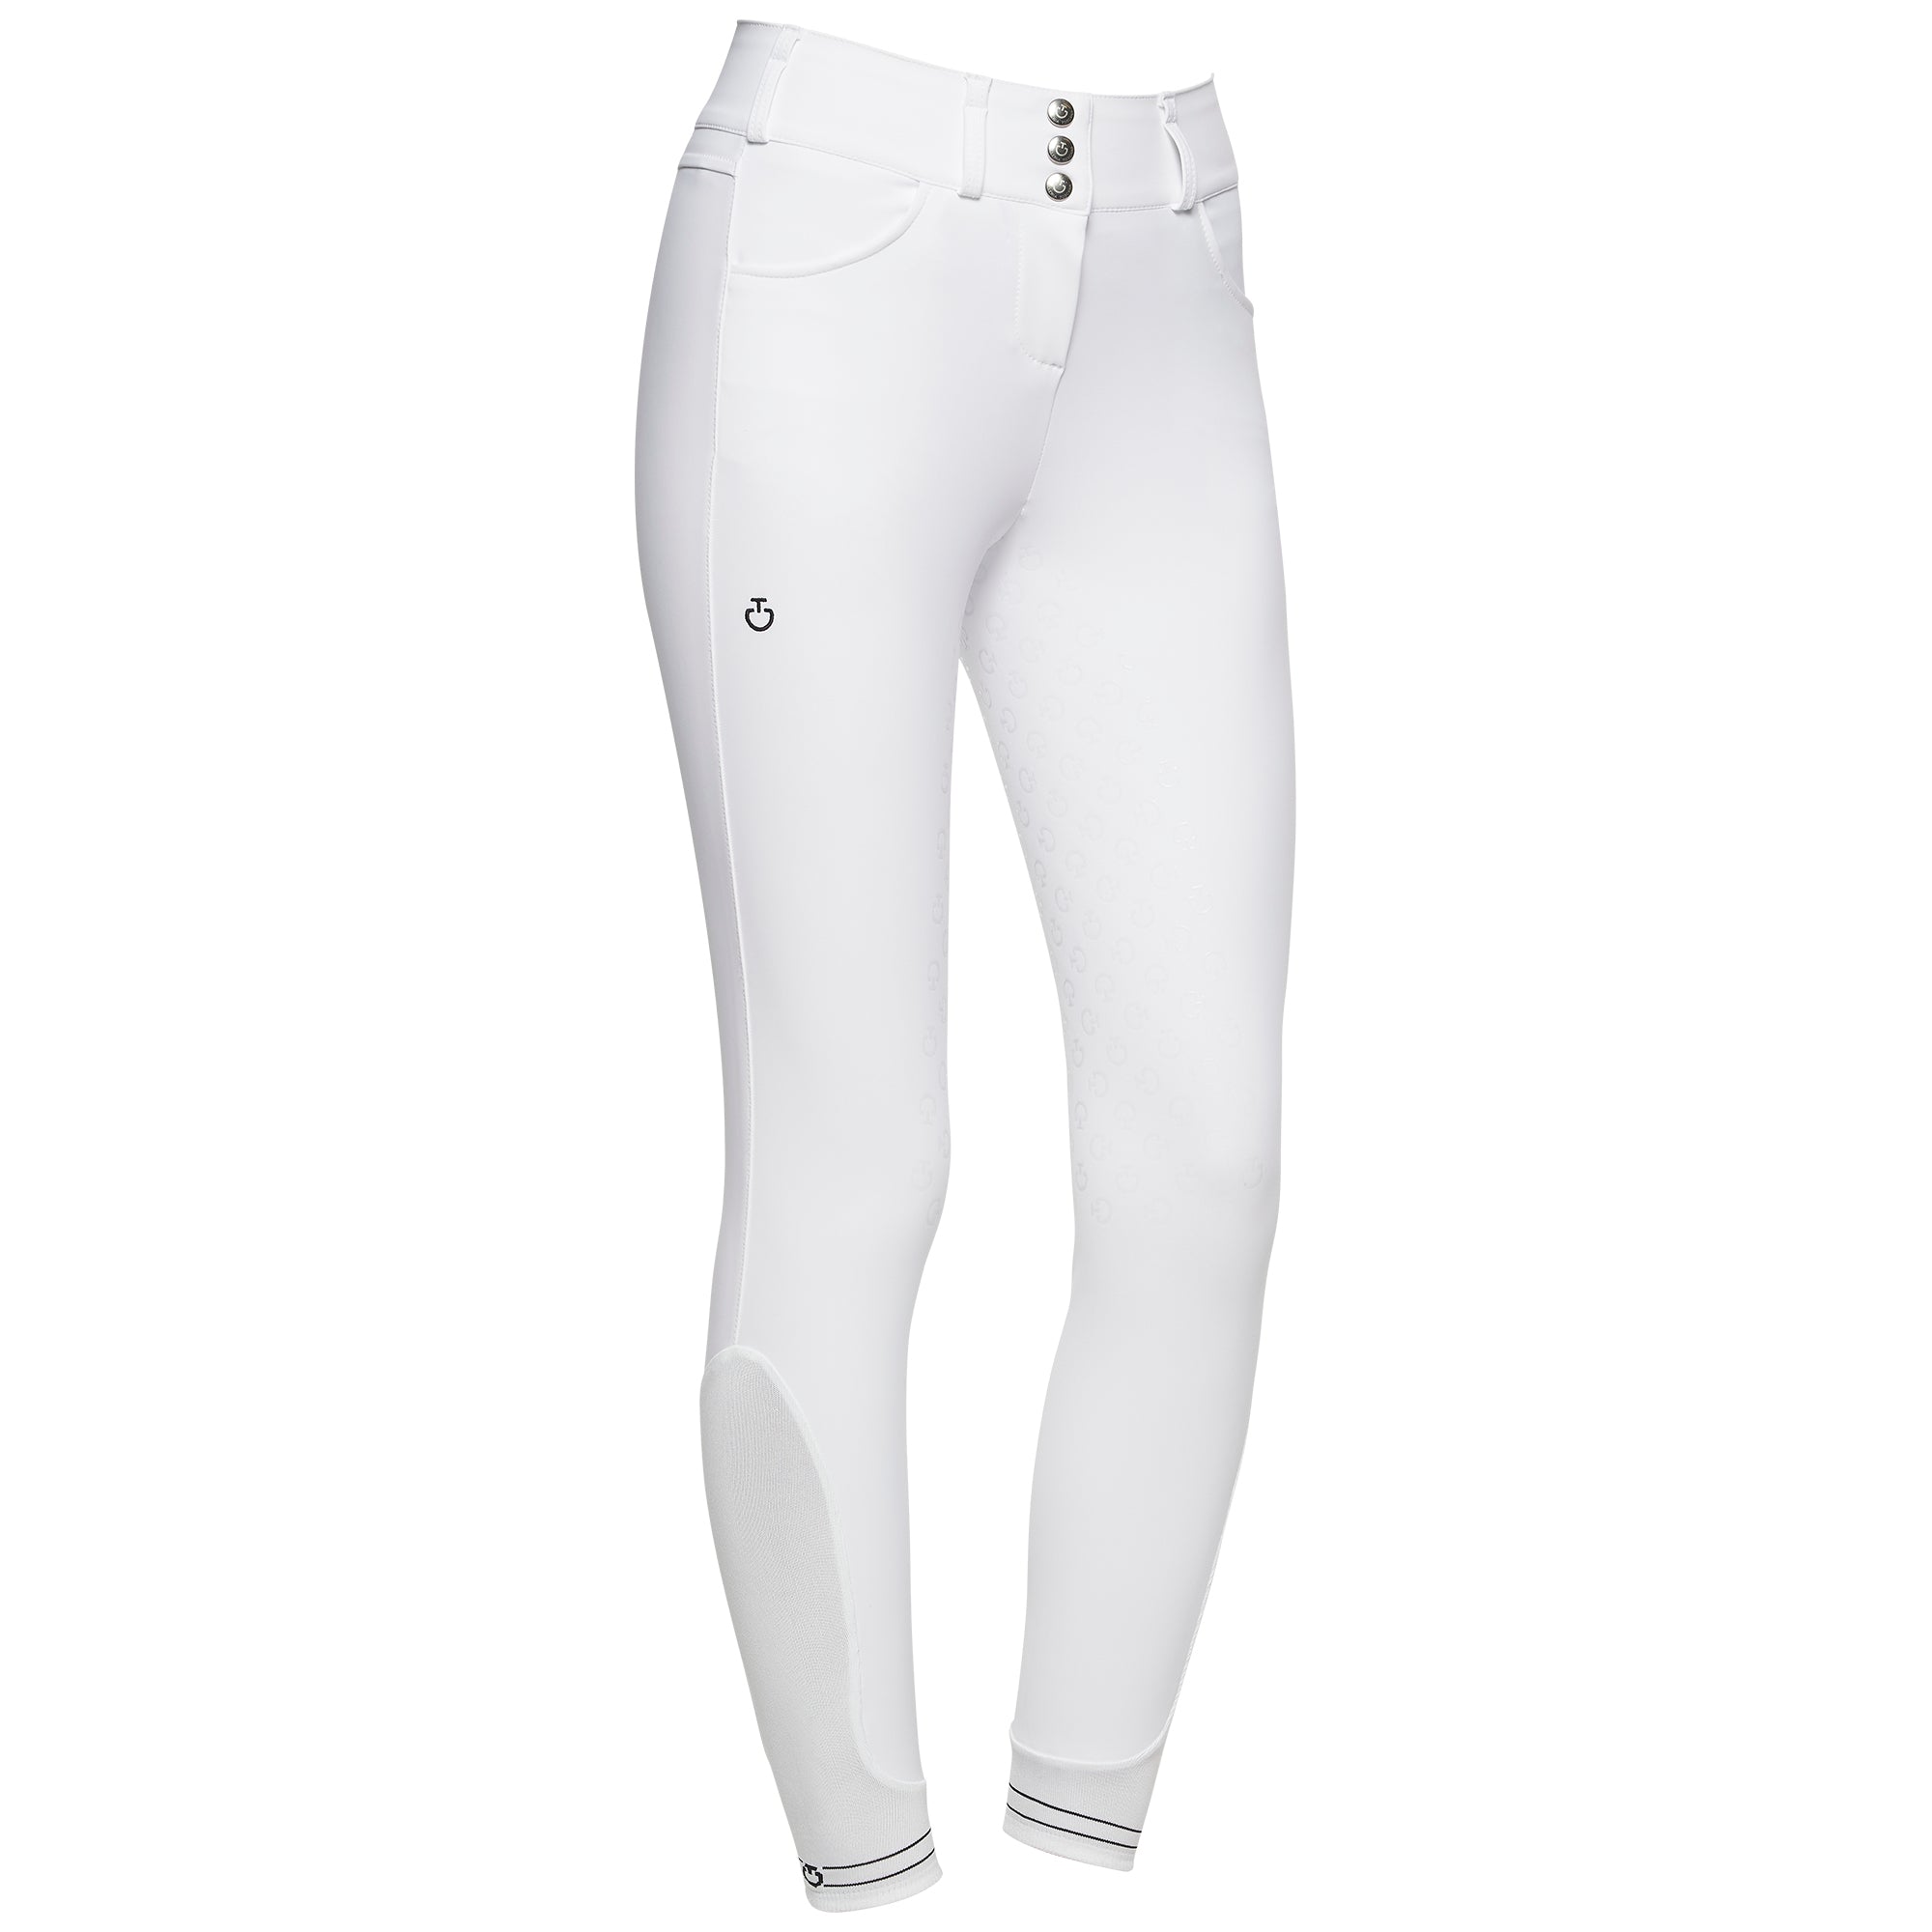 High Waist Silicone Full Seat Riding Breeches Competition Pants